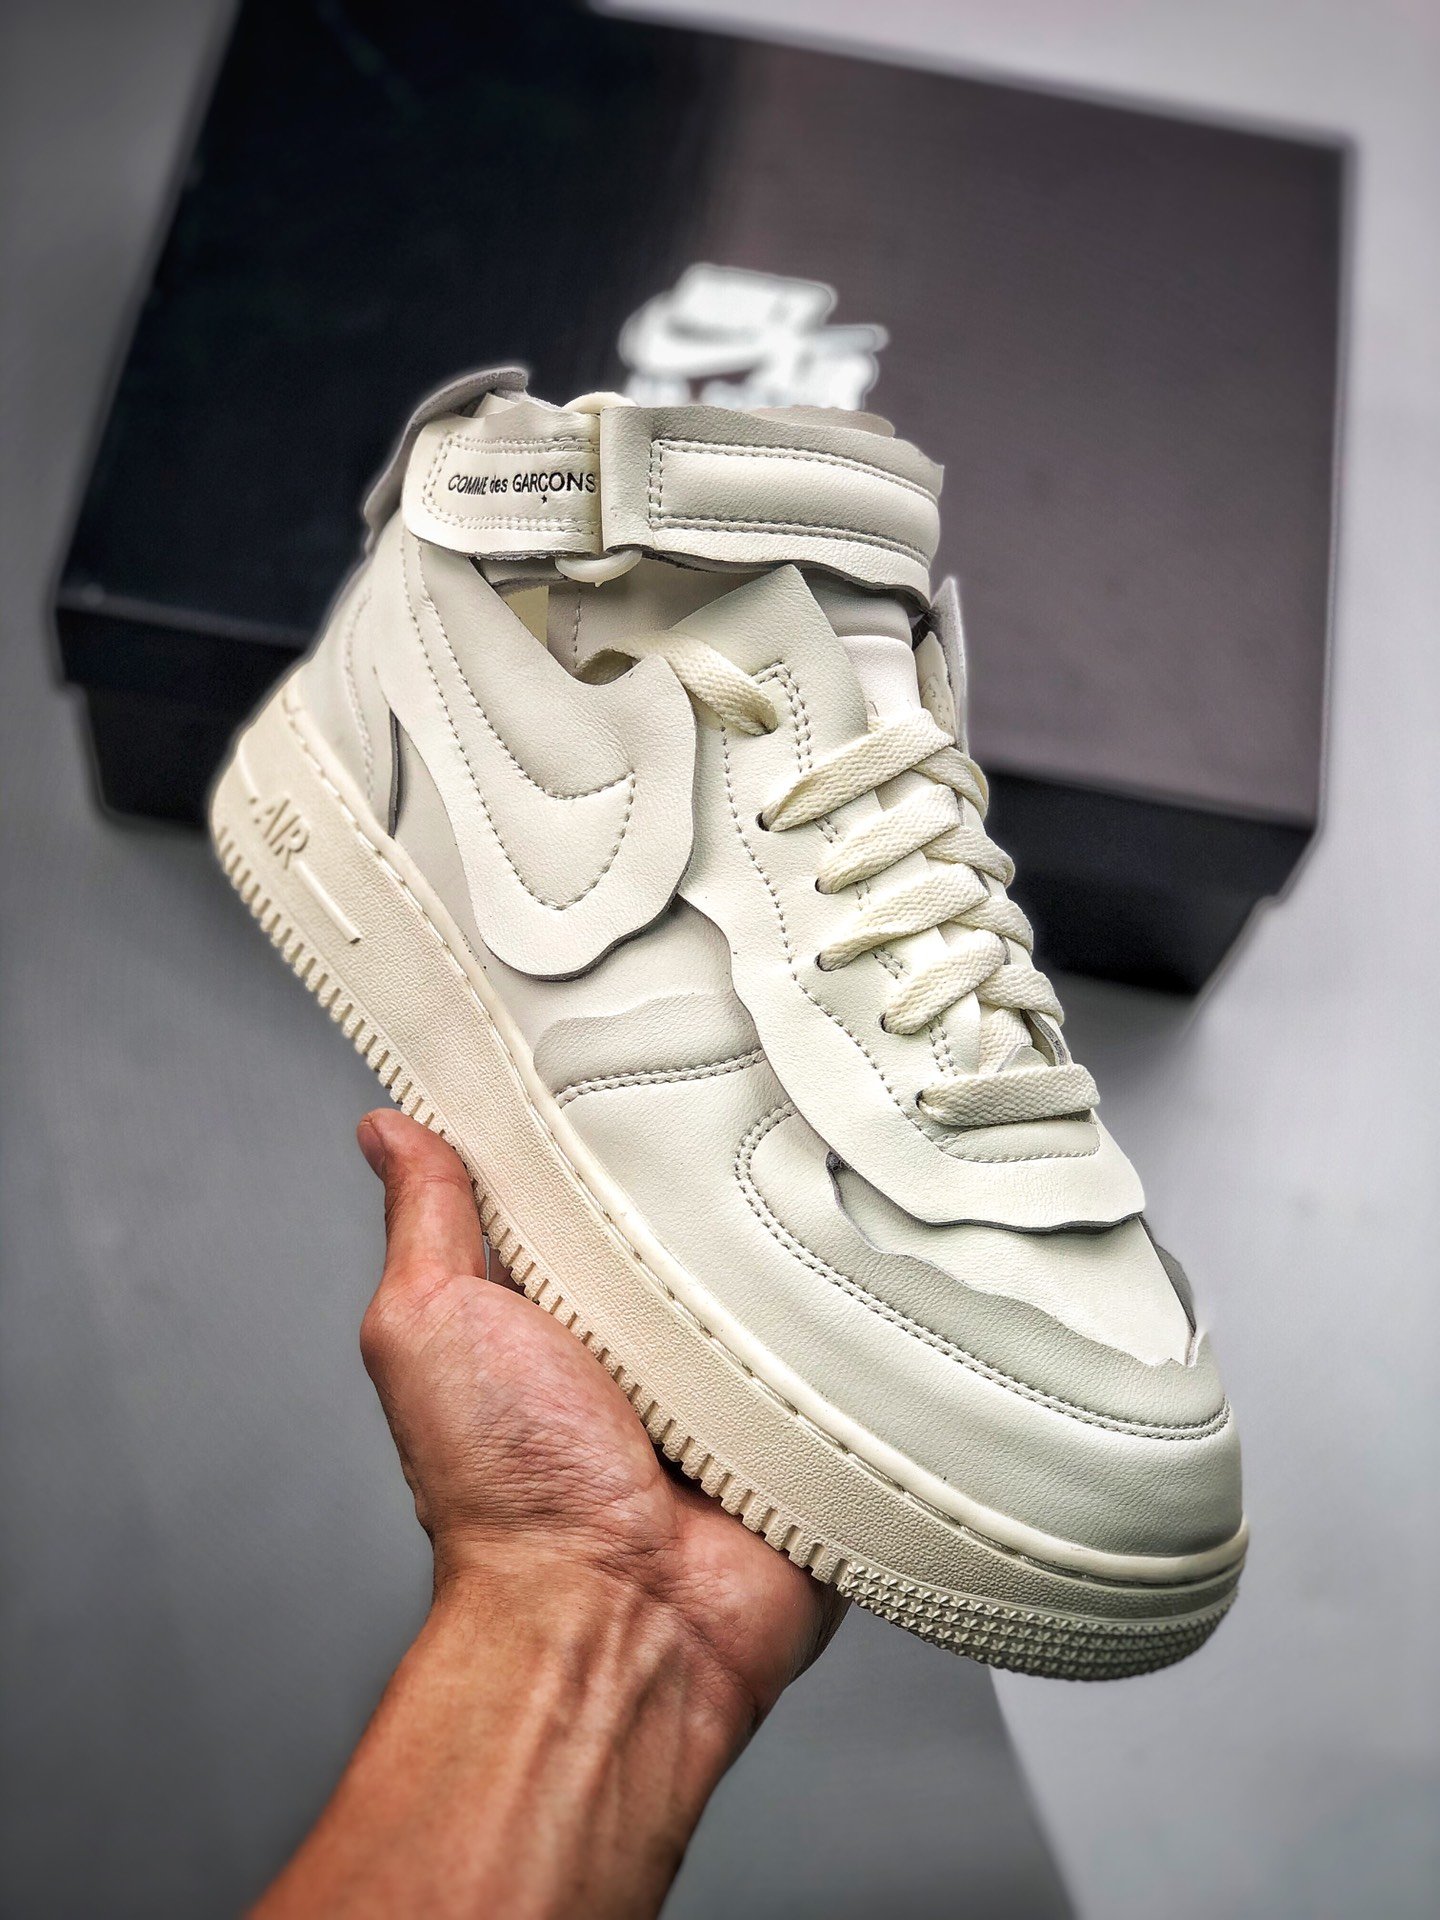 Buy > nike air force 1 mid size 9 > in stock